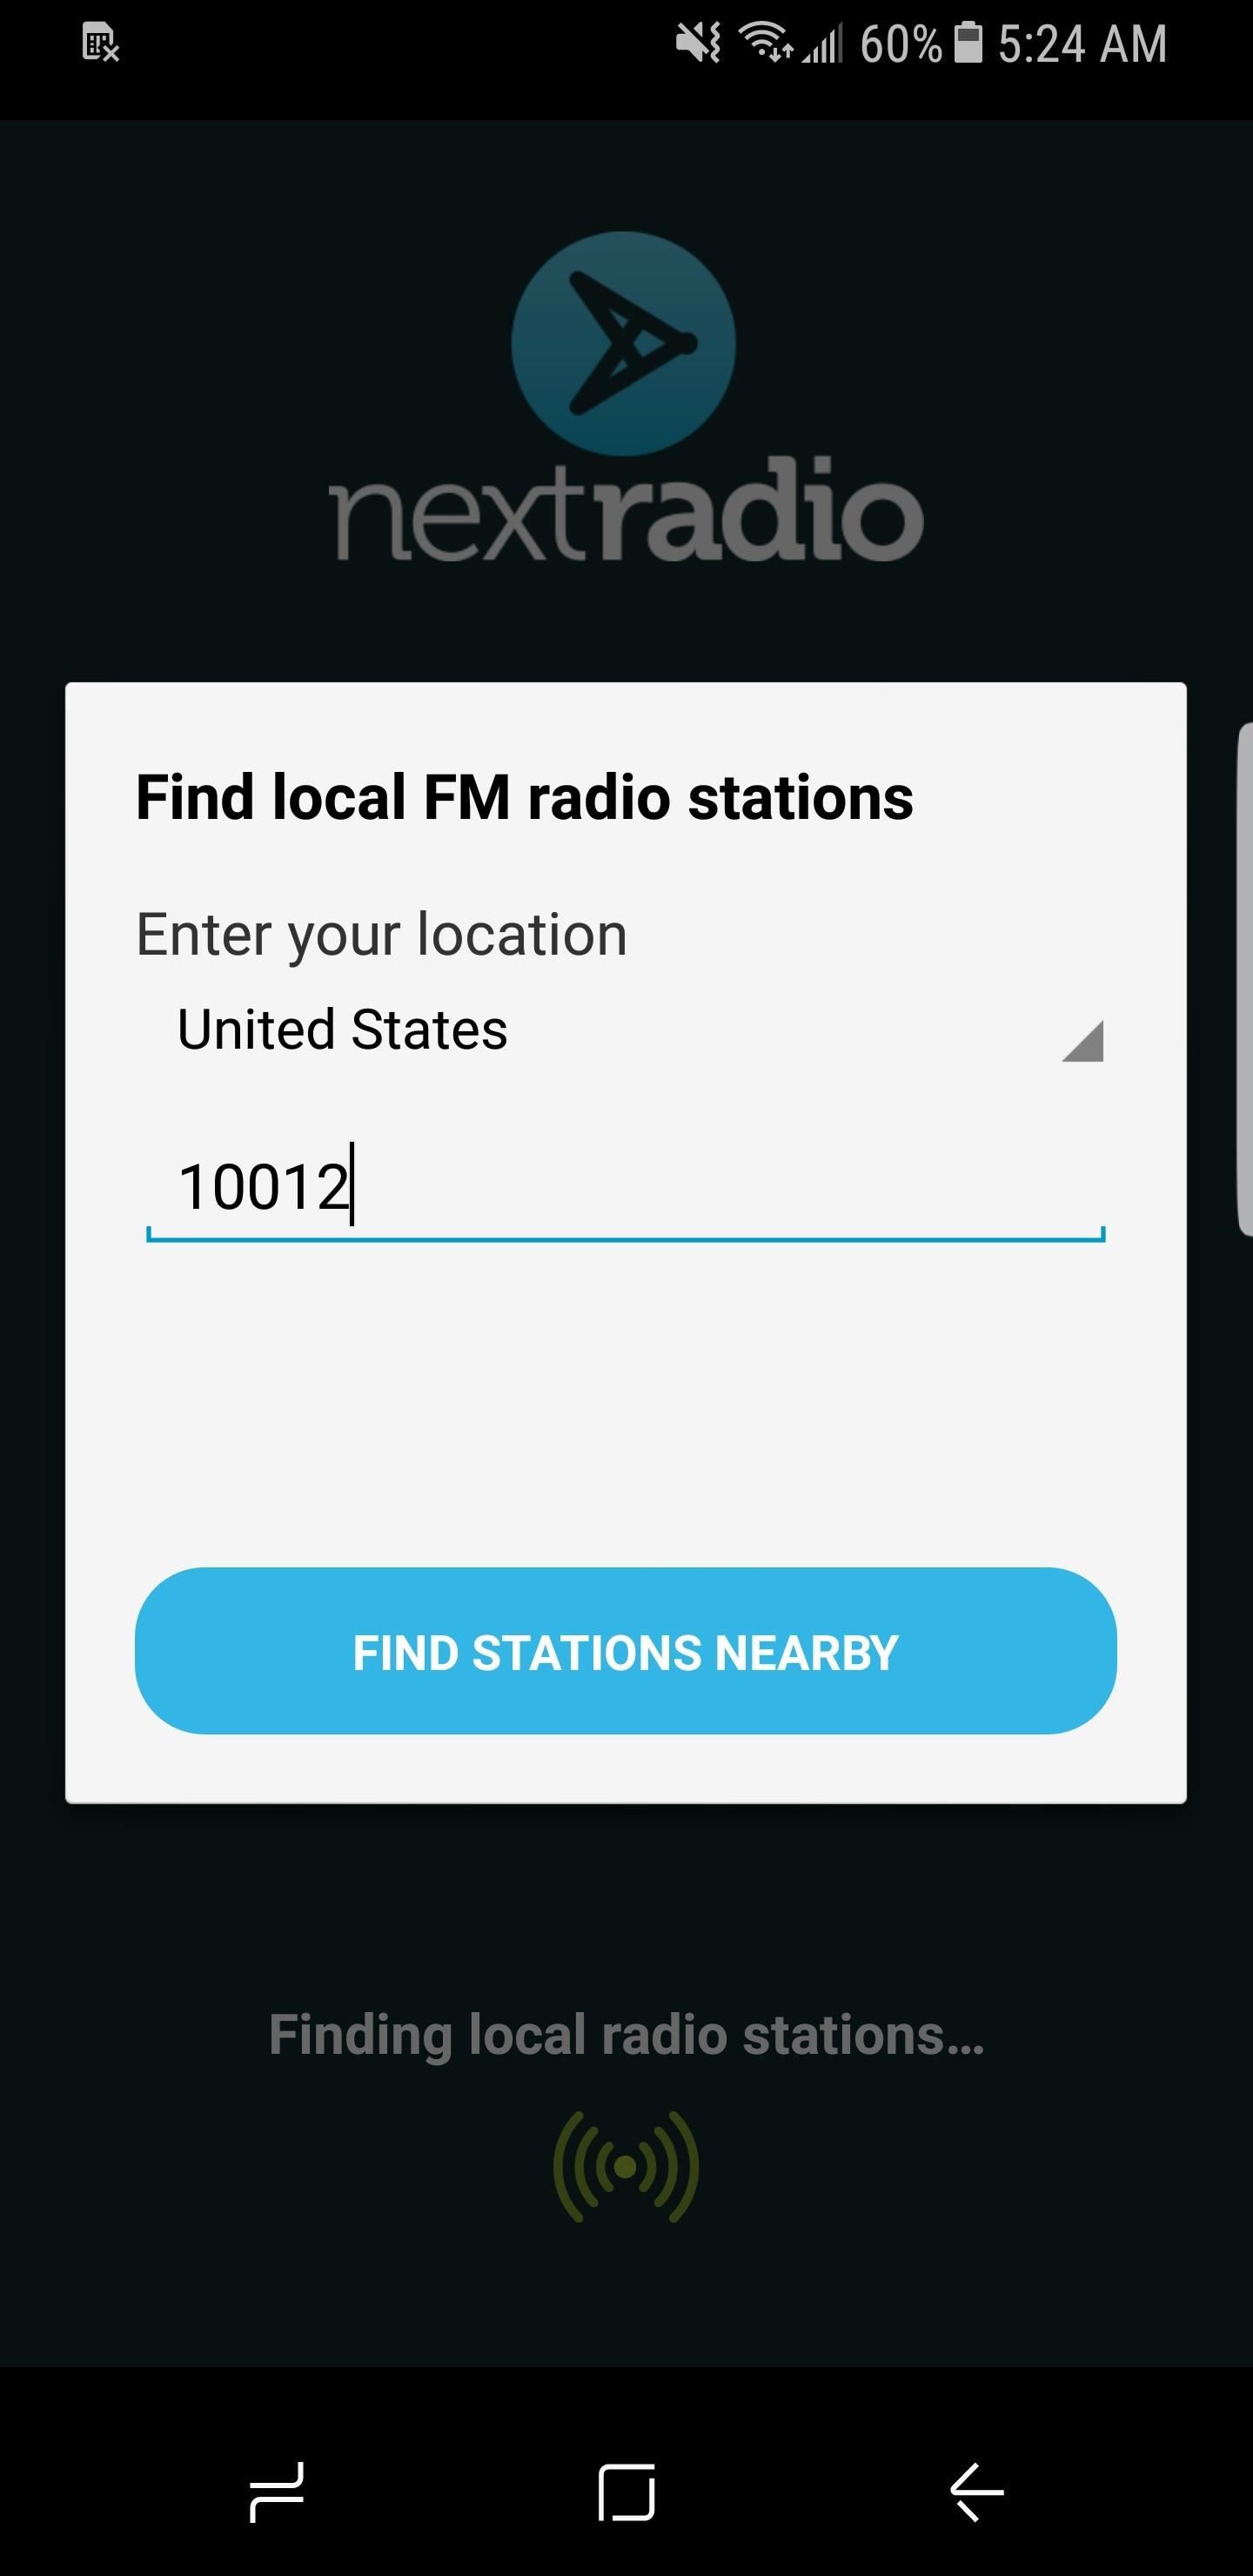 How to Get Live FM Radio on Your Galaxy S8 or S8+